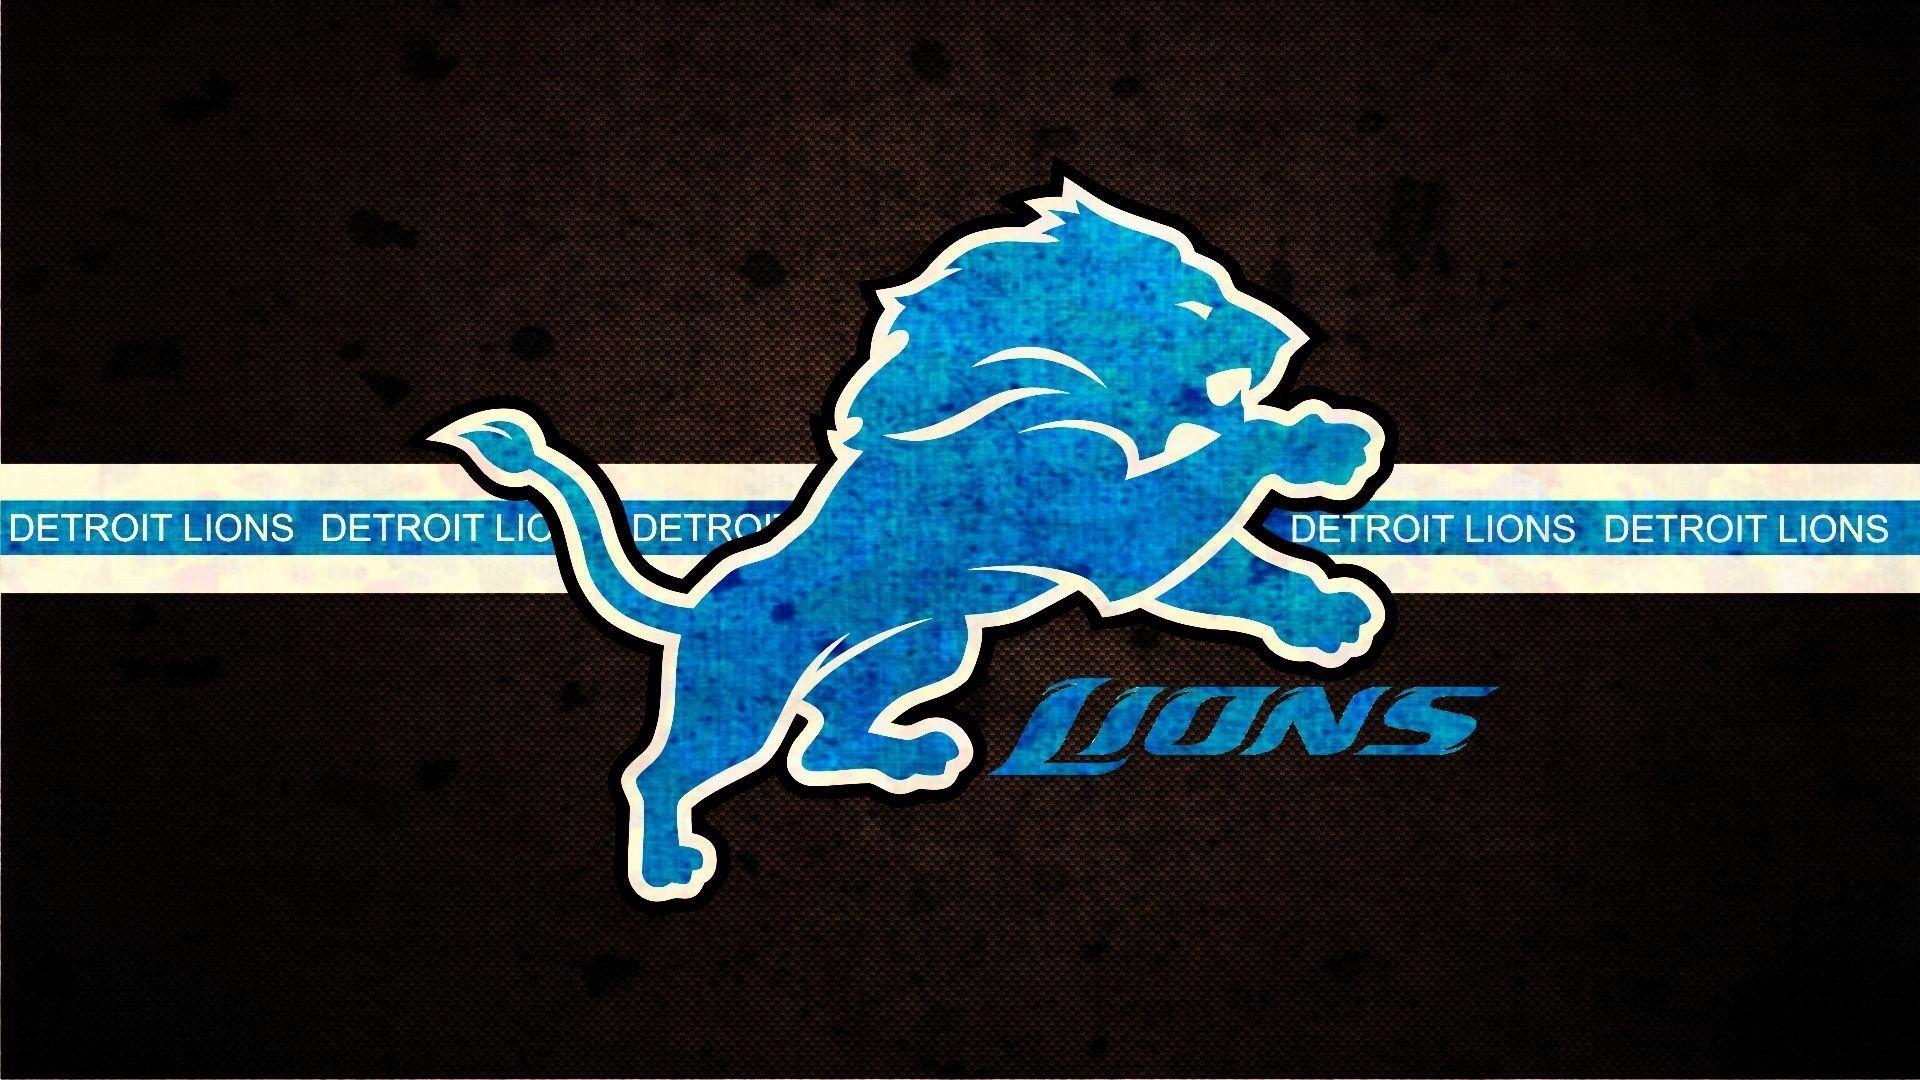 2023 Detroit Lions 2023 NFL Mock Draft Ben Johnson 2.0 Lomas Brown Lions ticket prices Mel Kiper 2023 NFL Draft 2023 Detroit Lions 2023 NFL Schedule Rumor Ty Johnson New York Jets David Montgomery Chicago Bears Chase Young